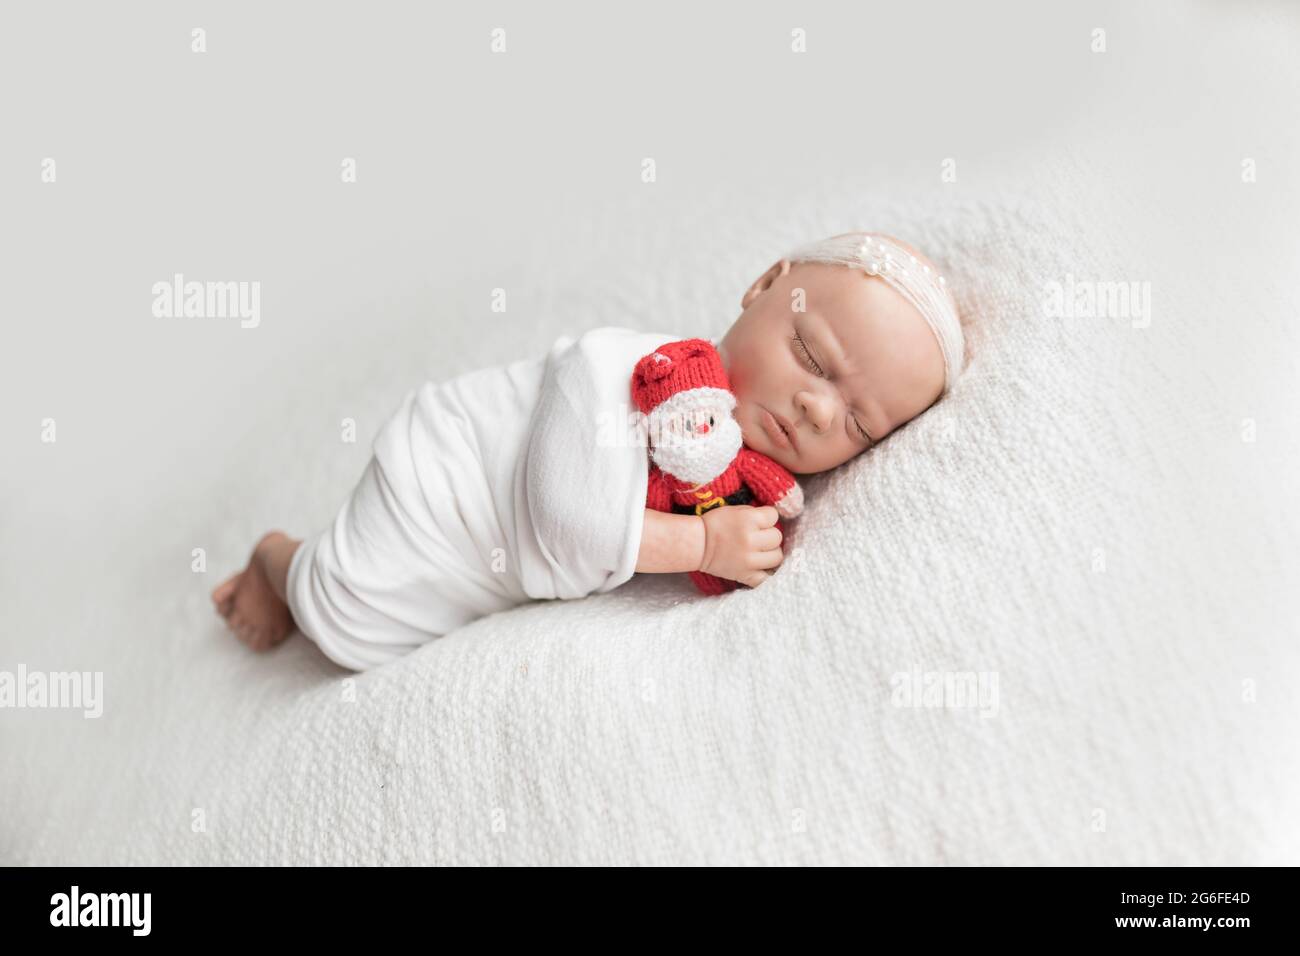 Newborn baby doll wrapped in a white wrap wearing a white pearled headband and cuddling a christmas santa claus lying on her side on a white blanket. Stock Photo